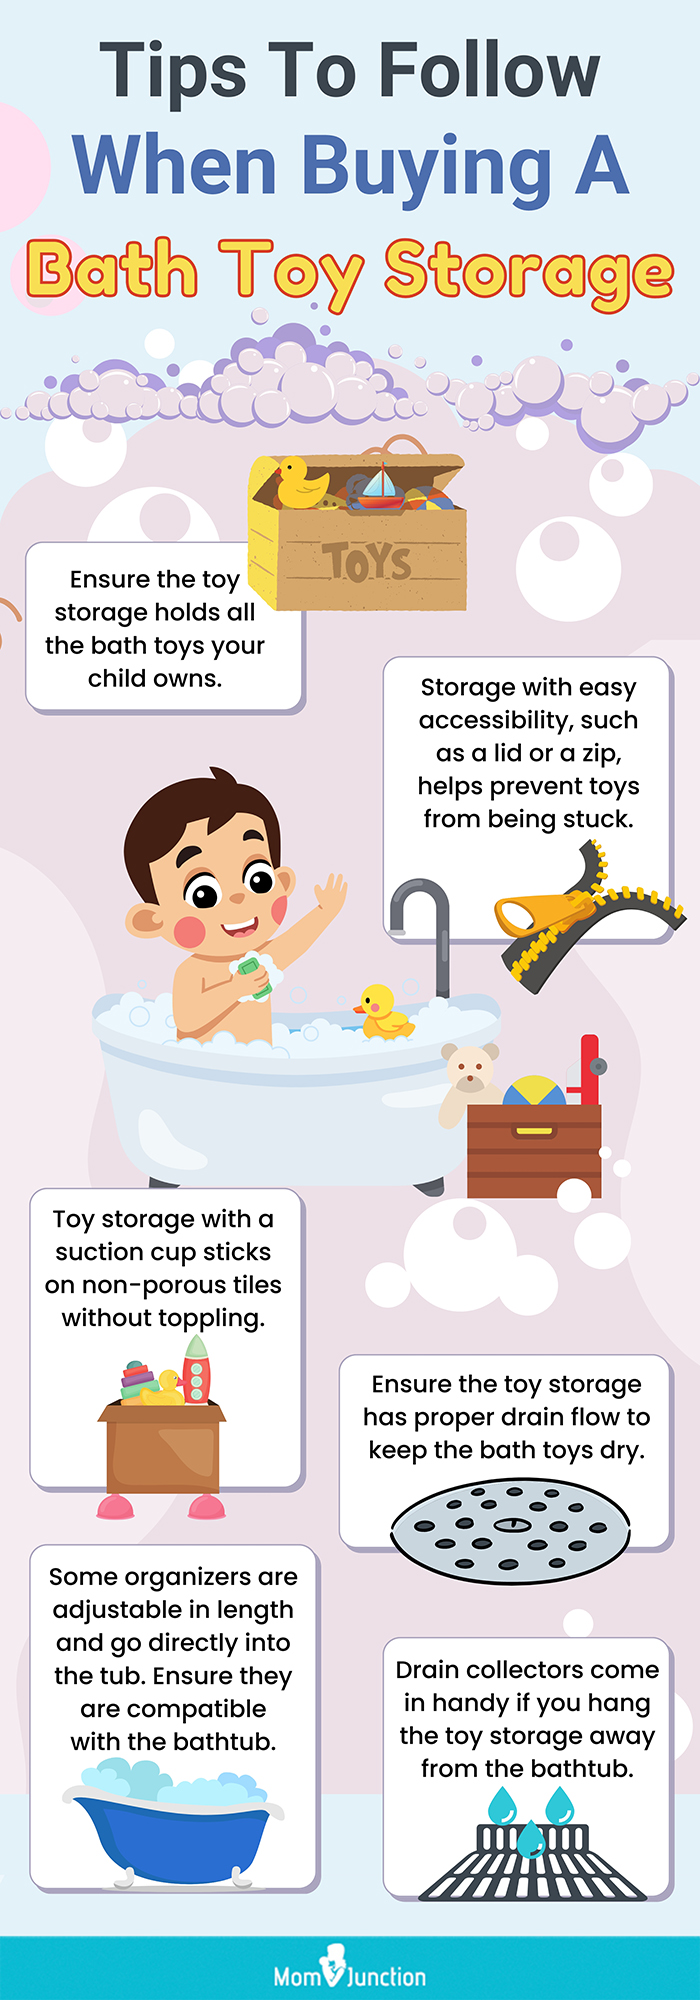 https://www.momjunction.com/wp-content/uploads/2023/02/Tips-To-Follow-When-Buying-A-Bath-Toy-Storage.jpg